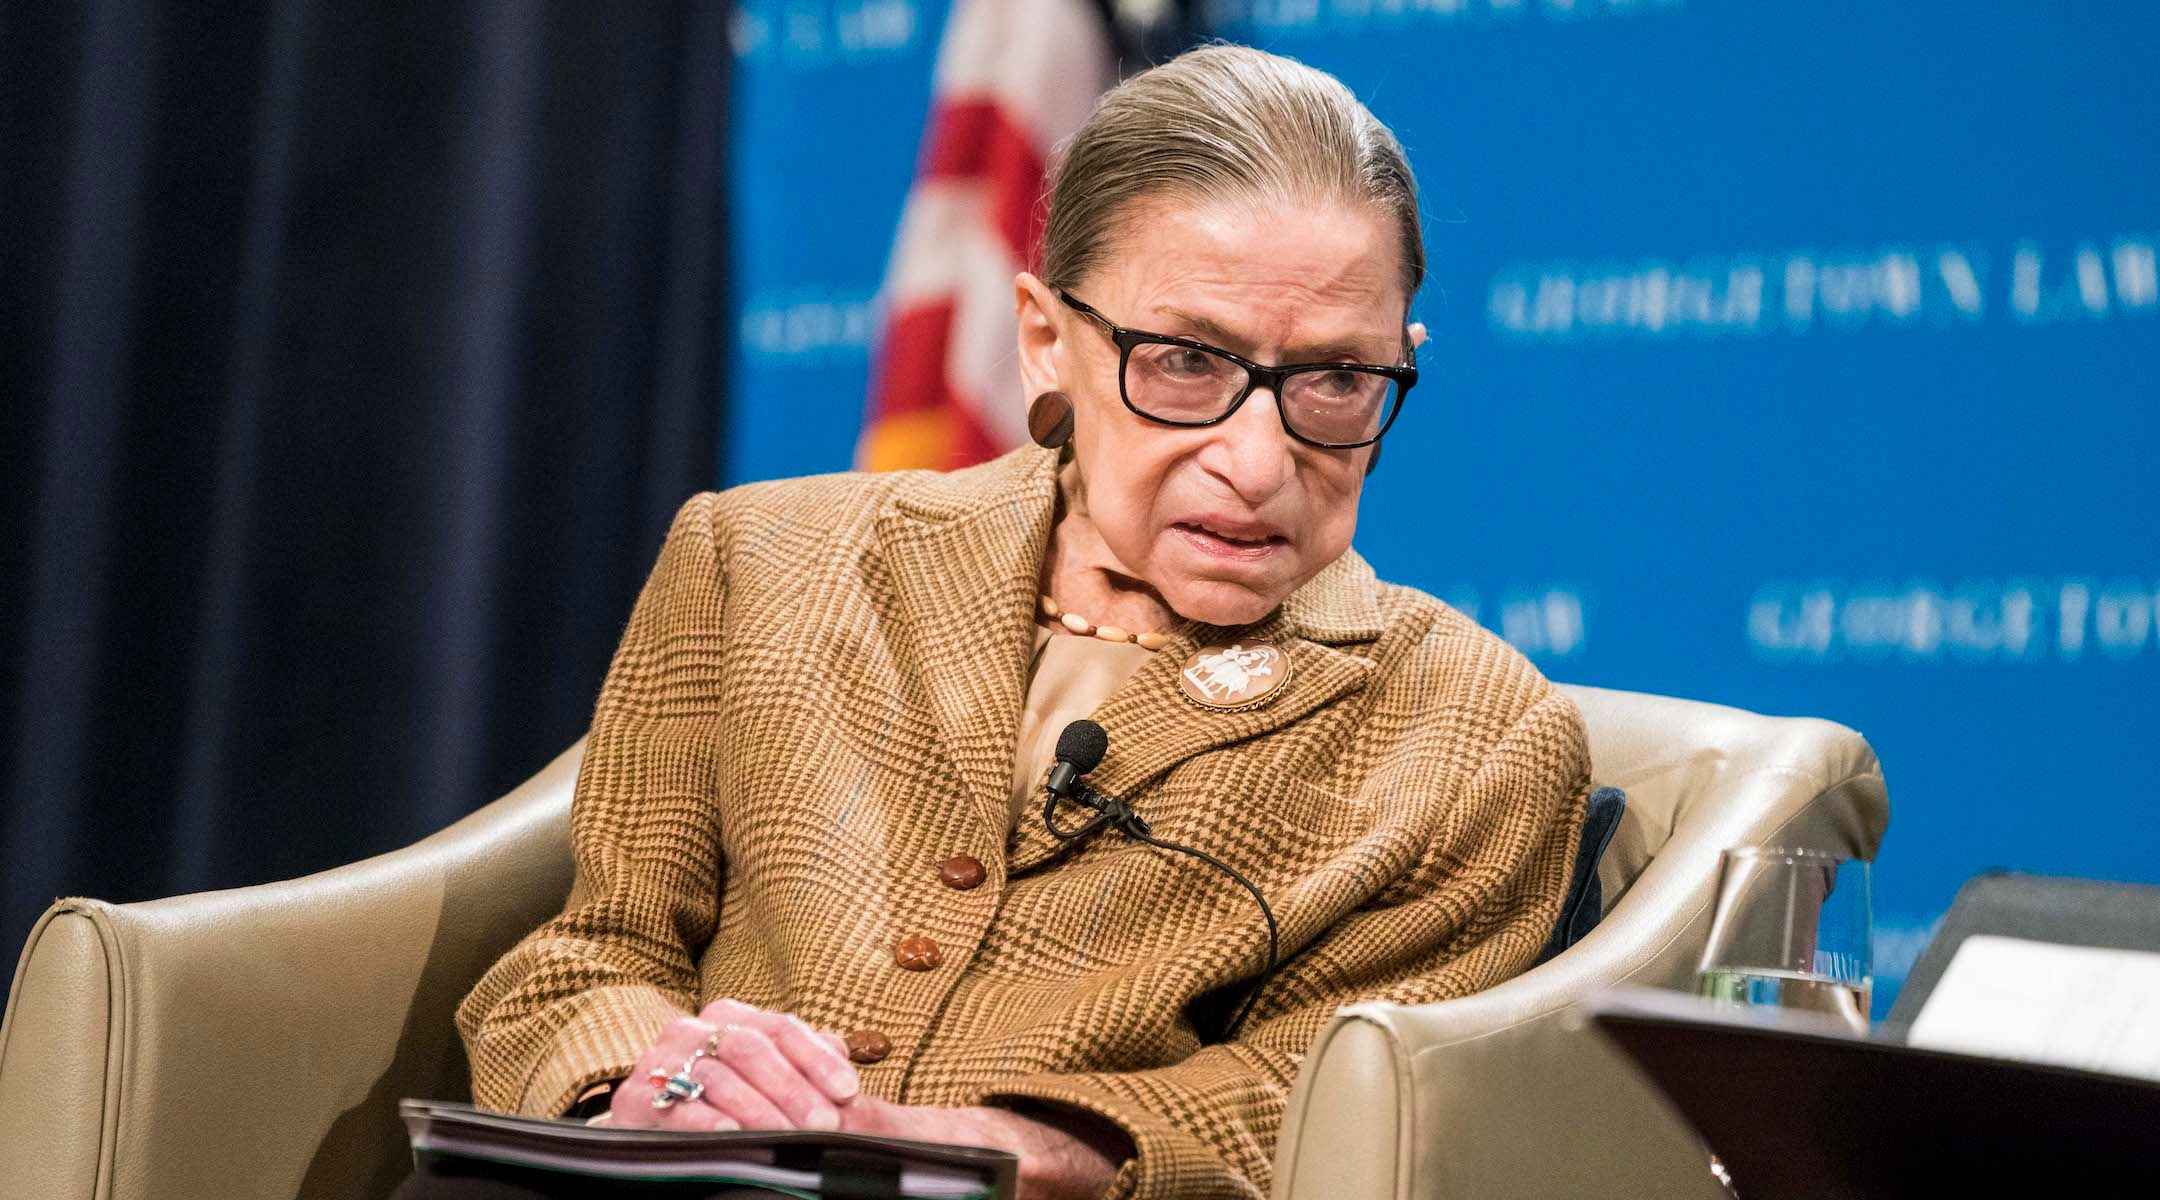 RBG’s library is being auctioned online and includes more than 30 books about Jewish topics